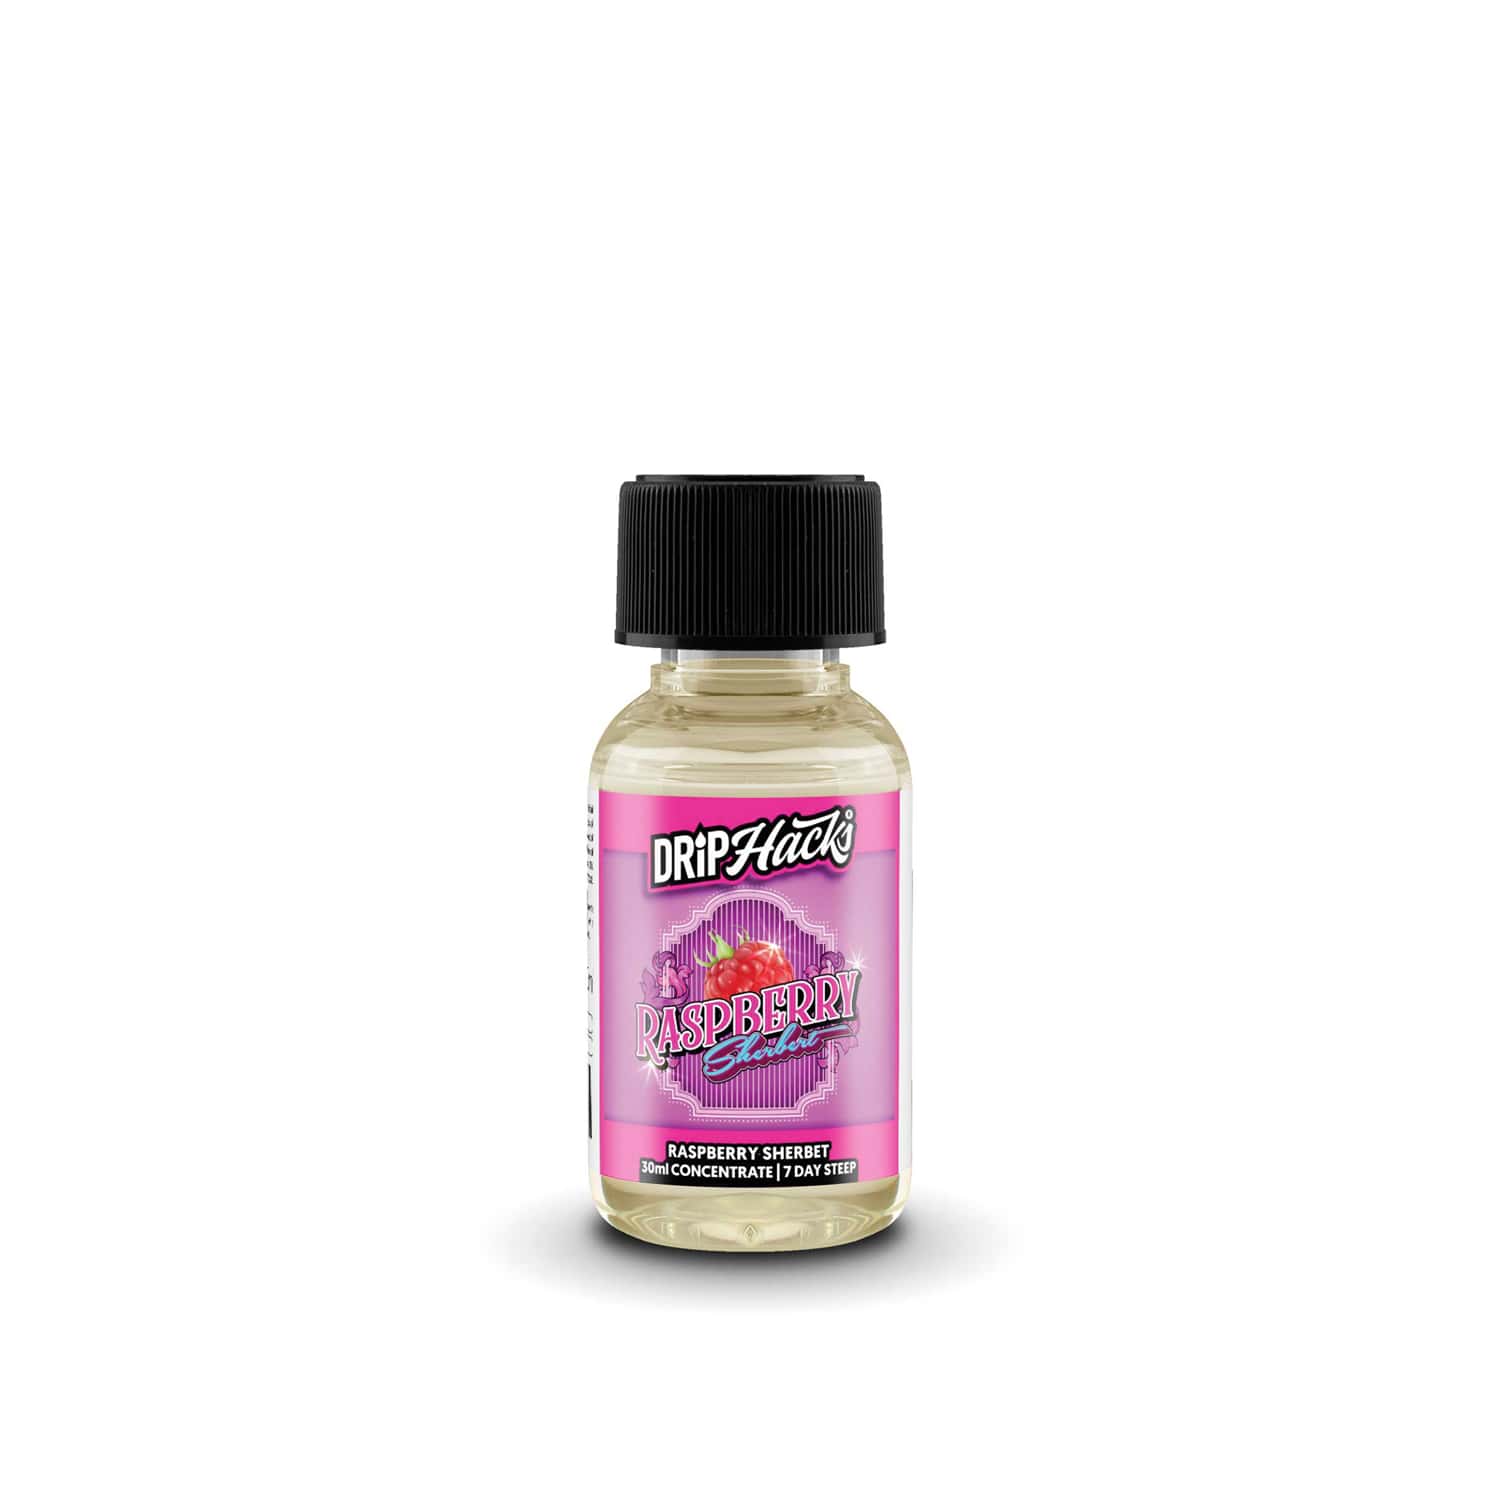 Raspberry Sherbet Flavour Concentrate by Drip Hacks